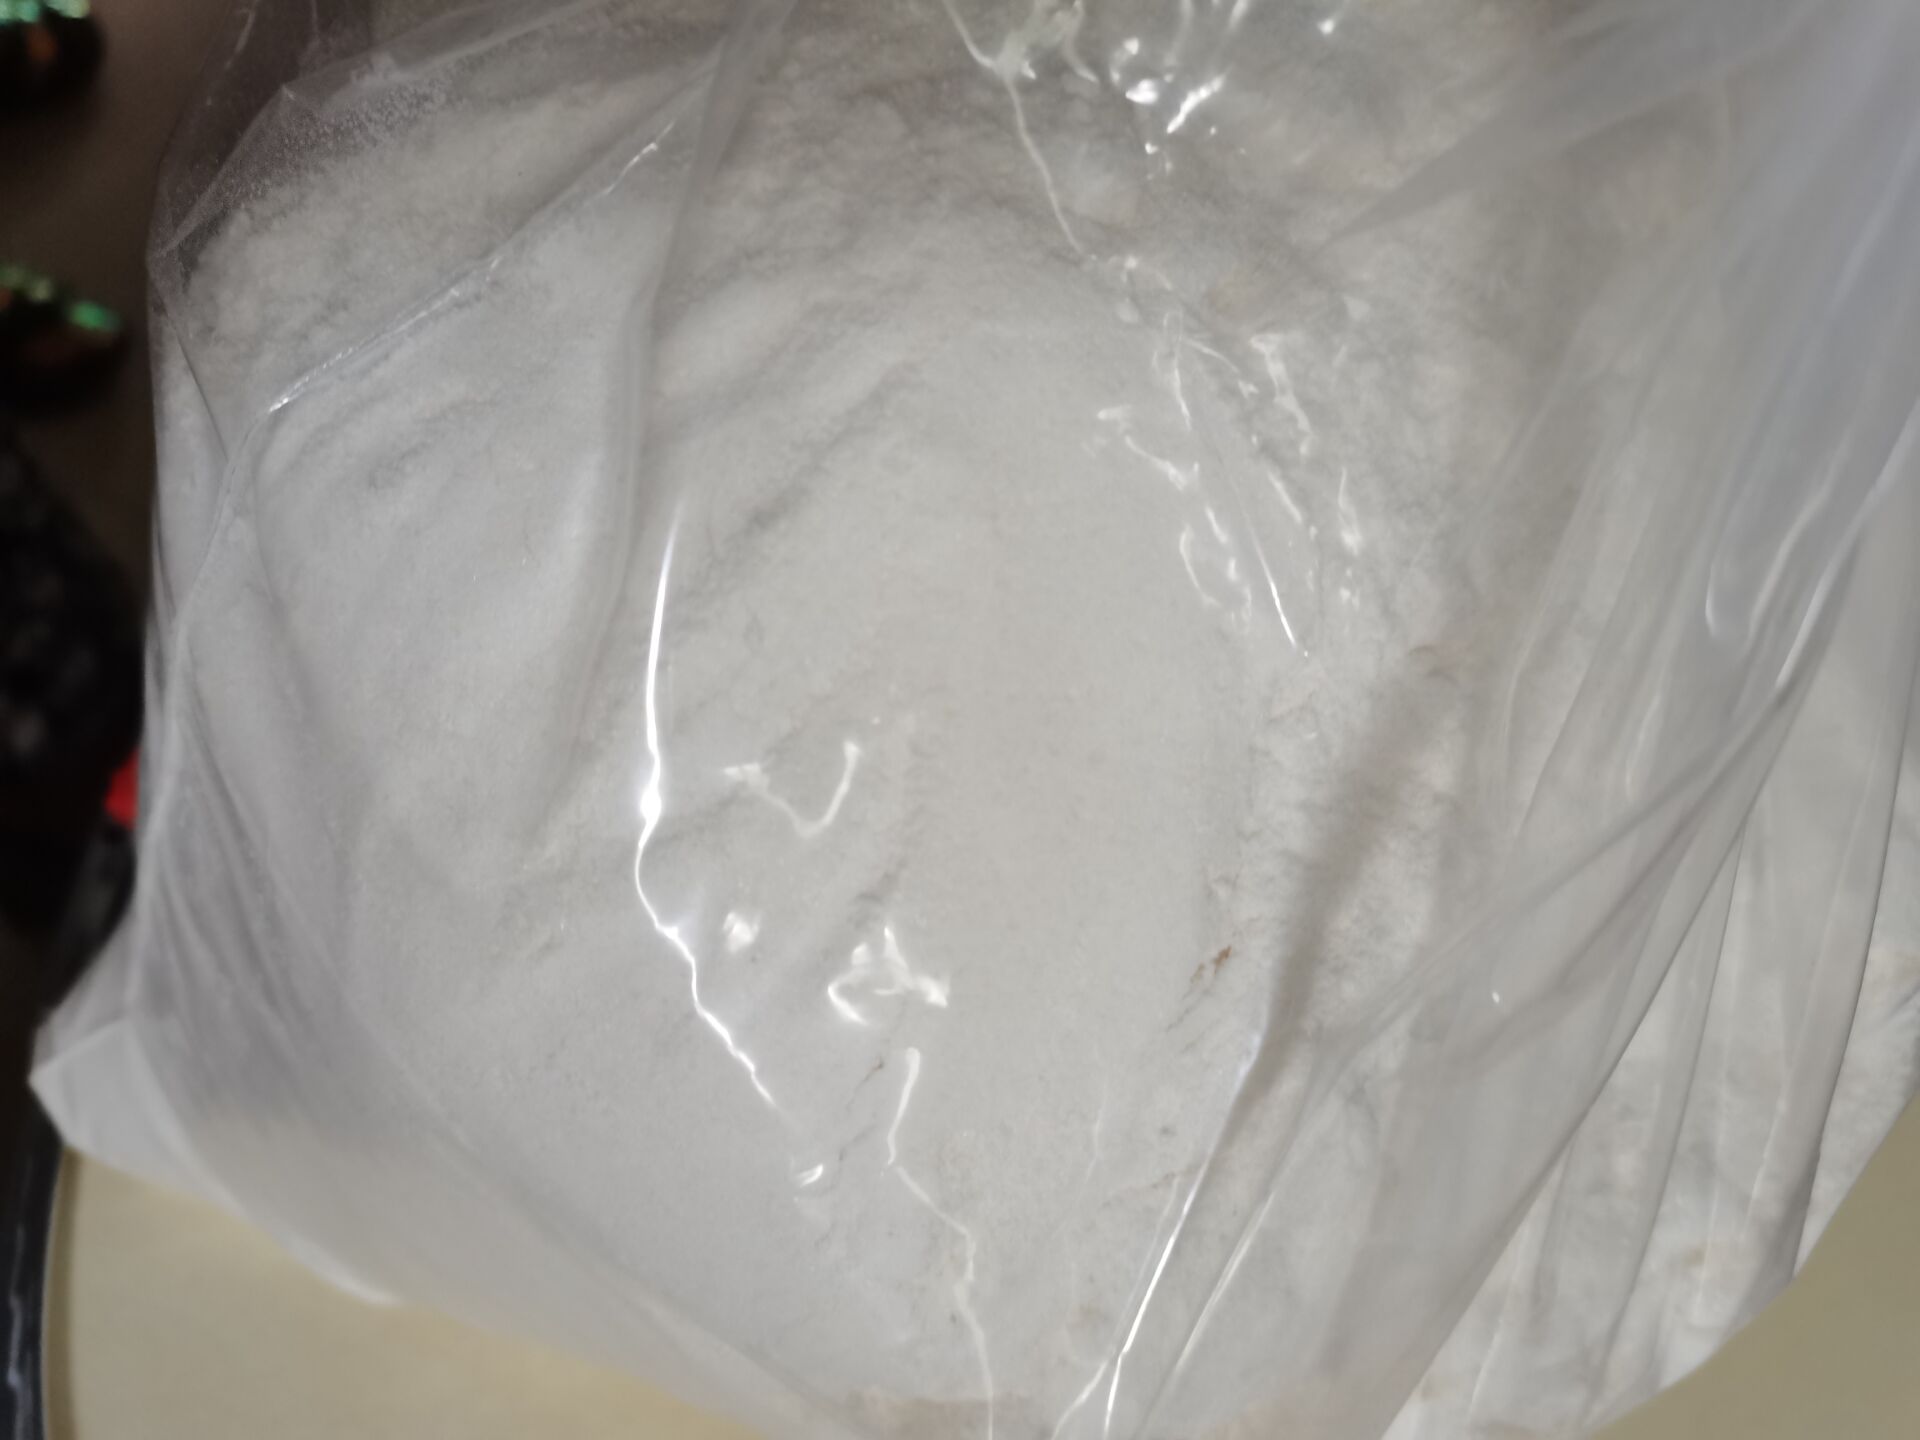 Powder N-(tert-Butoxycarbonyl)-4-piperidone CAS 79099-07-3 1-Boc-4-Piperidone Manufacturer Made in China